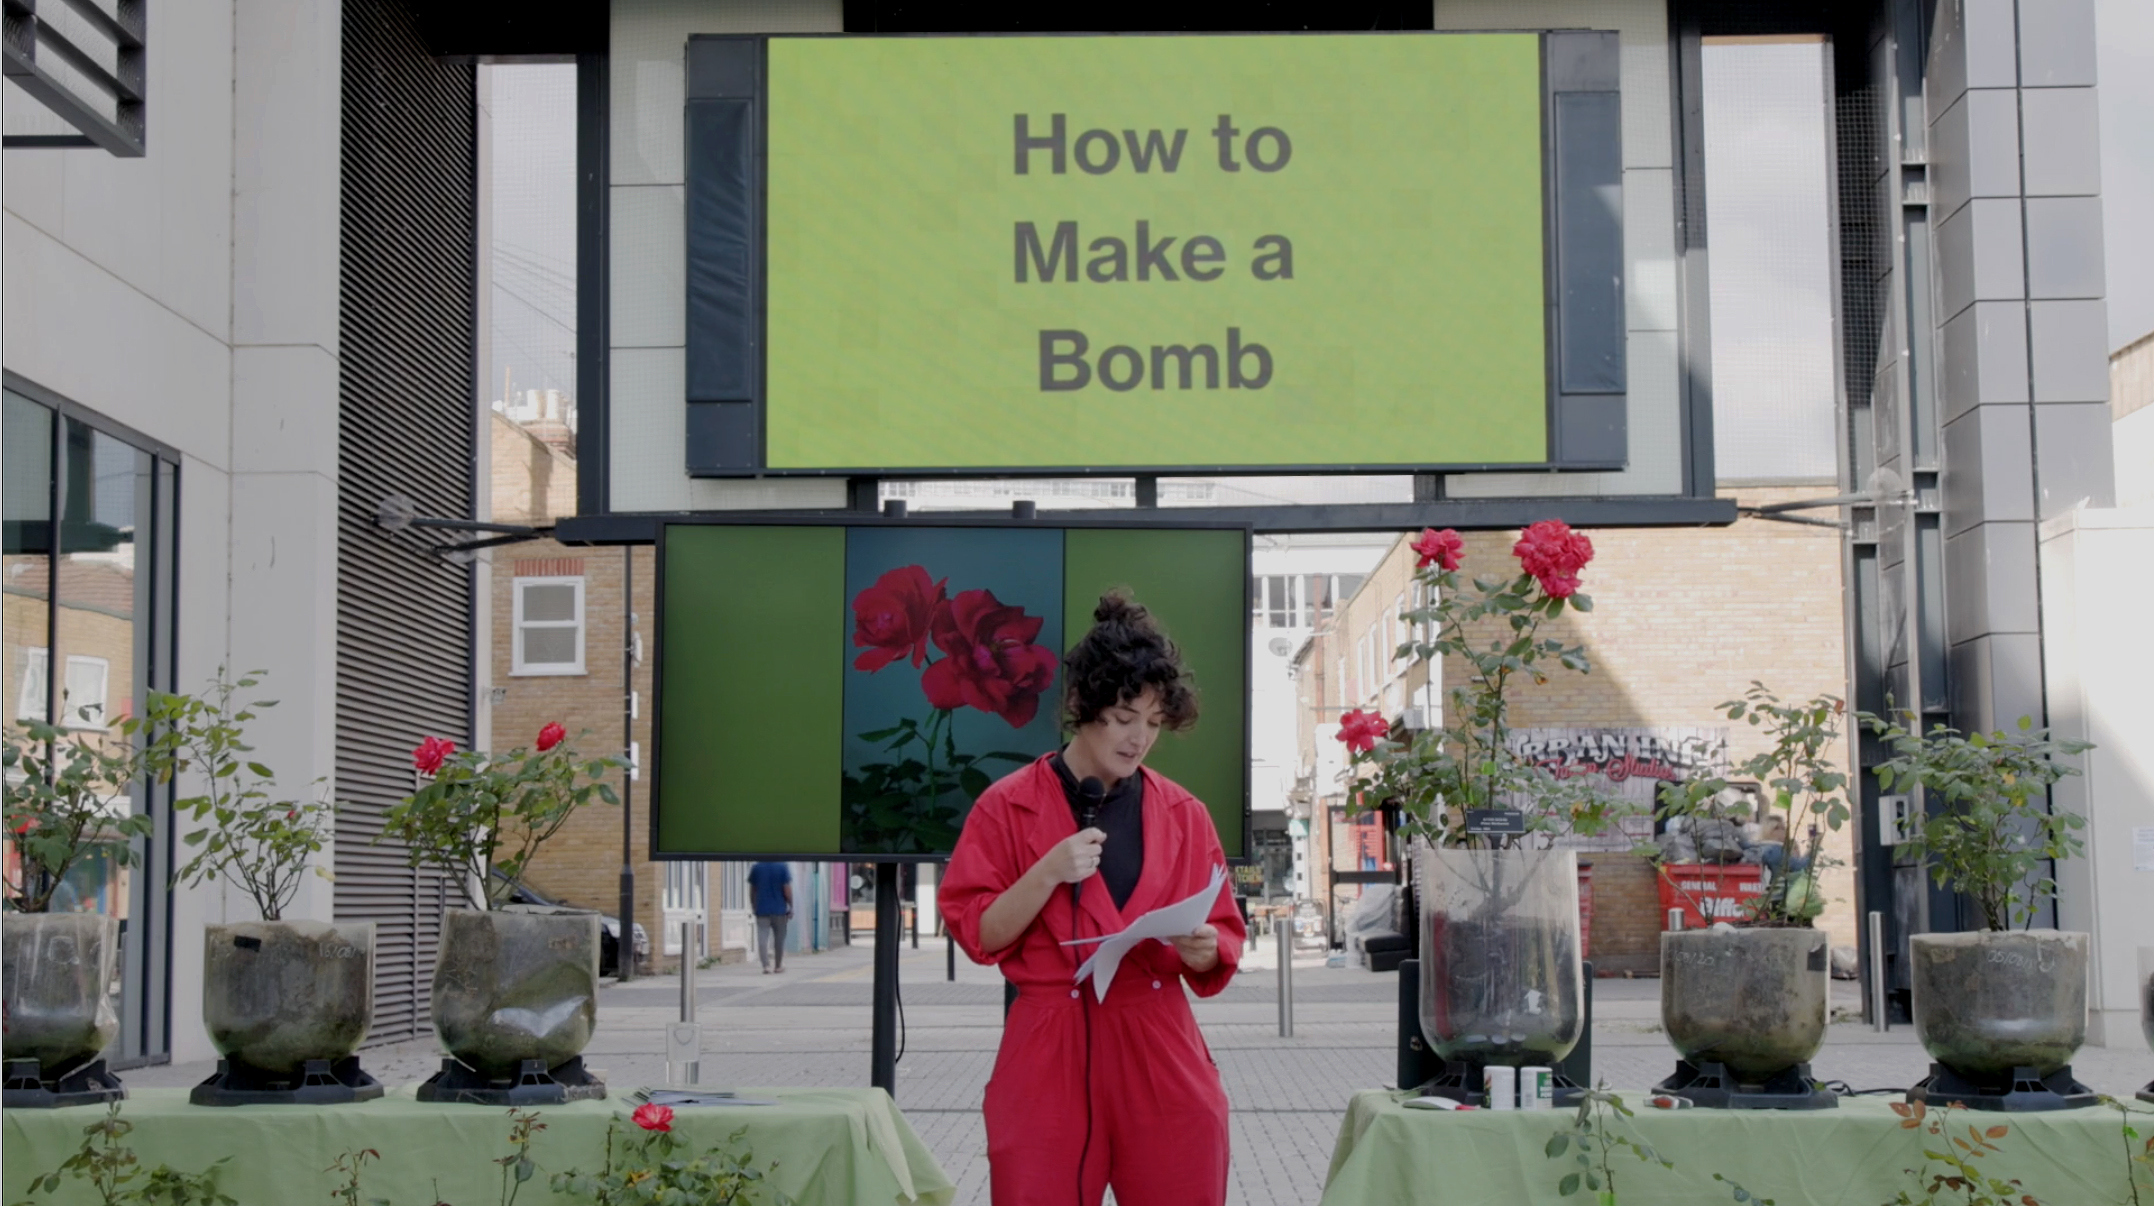 A woman wearing a red jumpsuit stands in front of various rose bushes speaking into a microphone. Behind her is a screen with a green background that says How to Make a Bomb